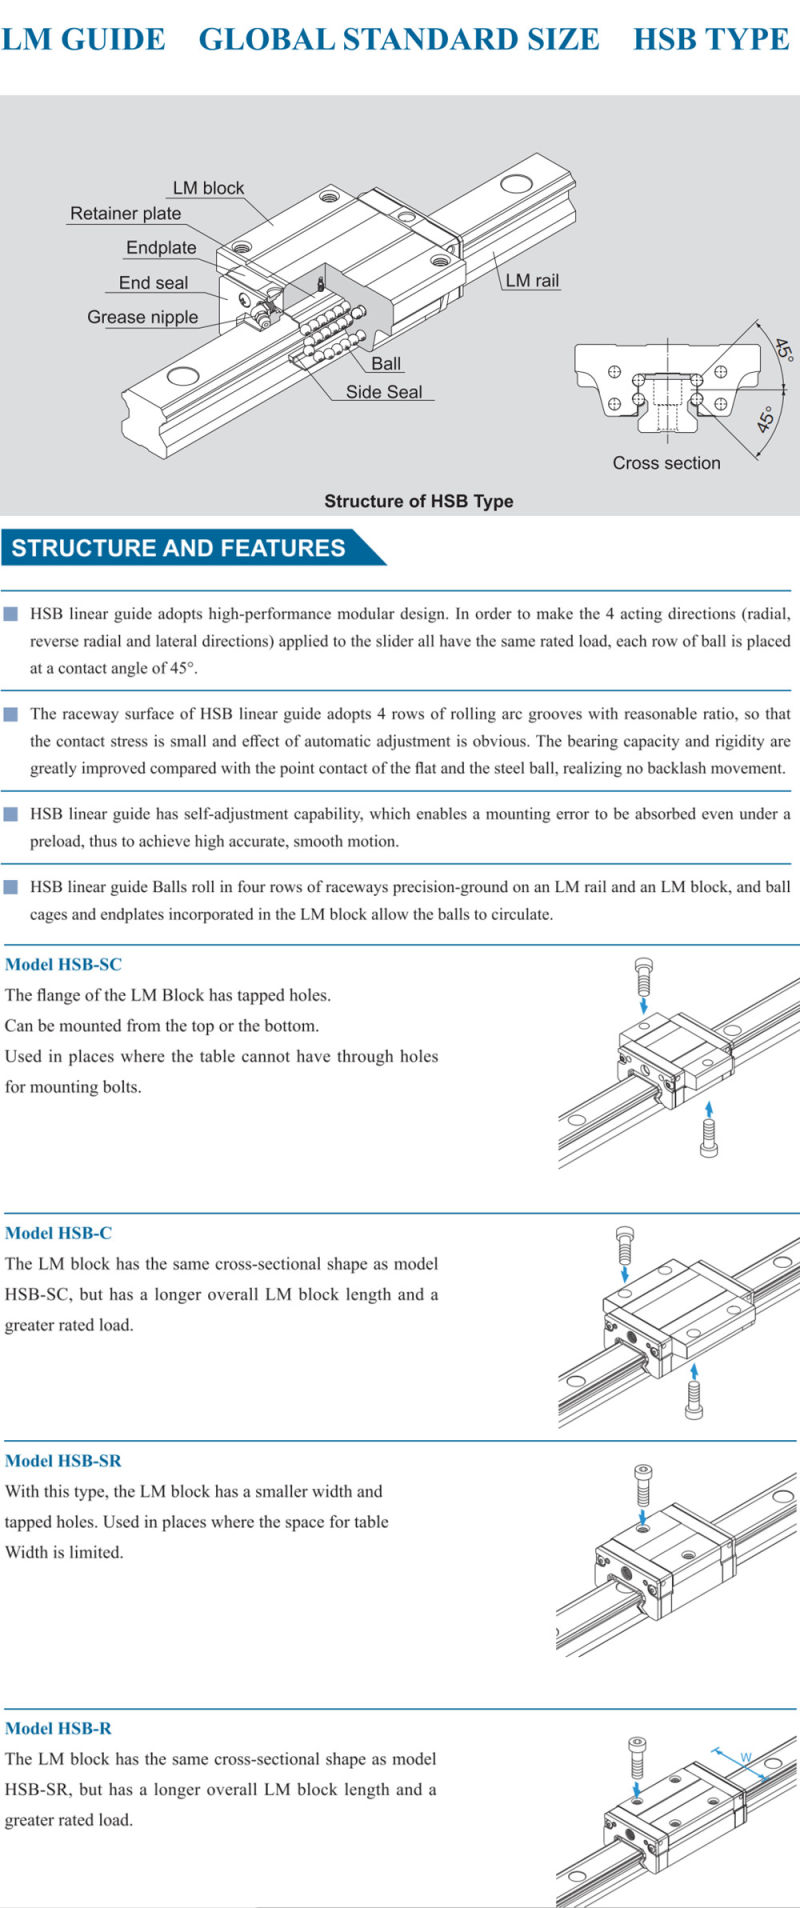 THK, Hiwin, PMI, SKF, Abba, Sbc, Csk Linear Ball Bearing Guides, Linear Guide Way System, Linear Guide Kit